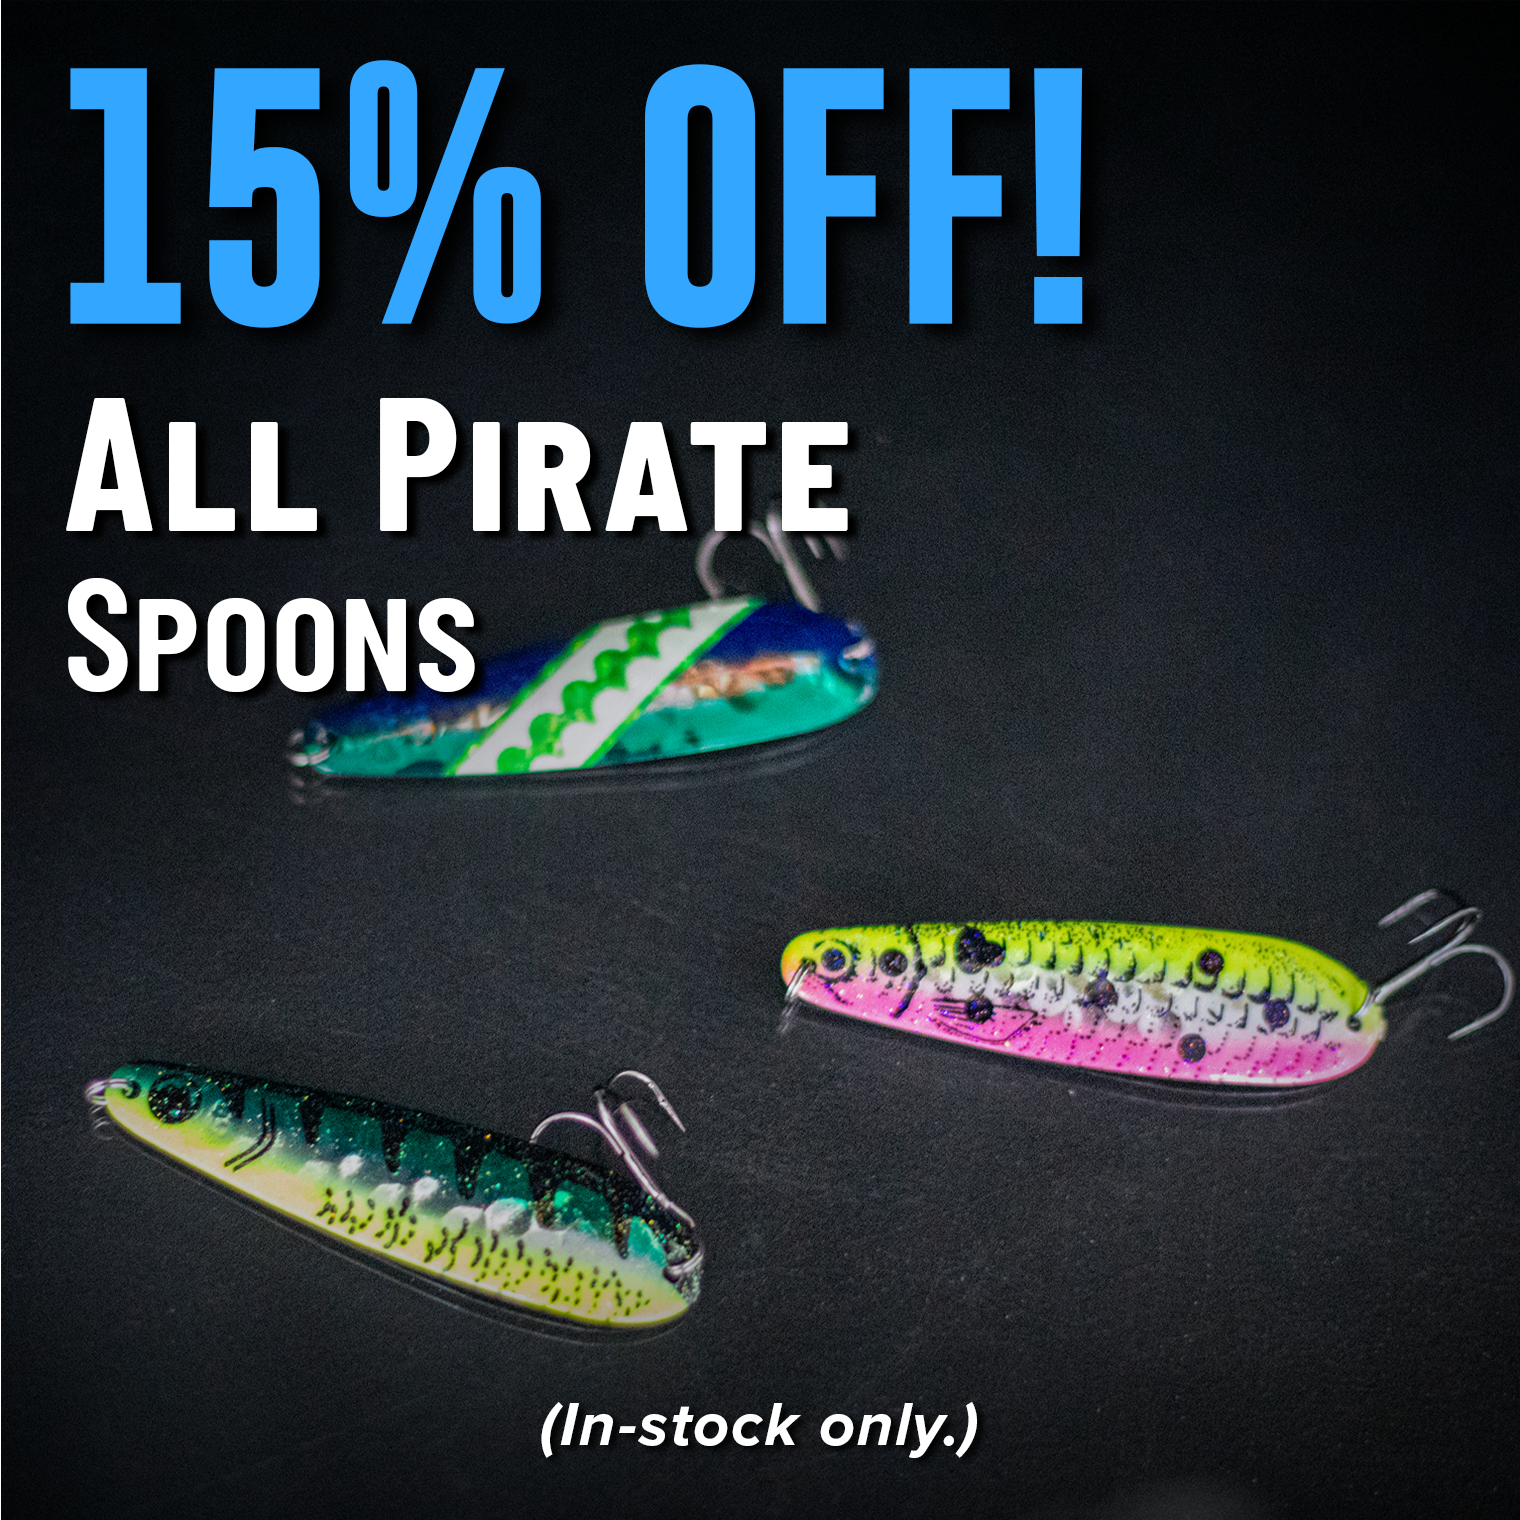 15% Off! All Pirate Spoons (In-stock only.)